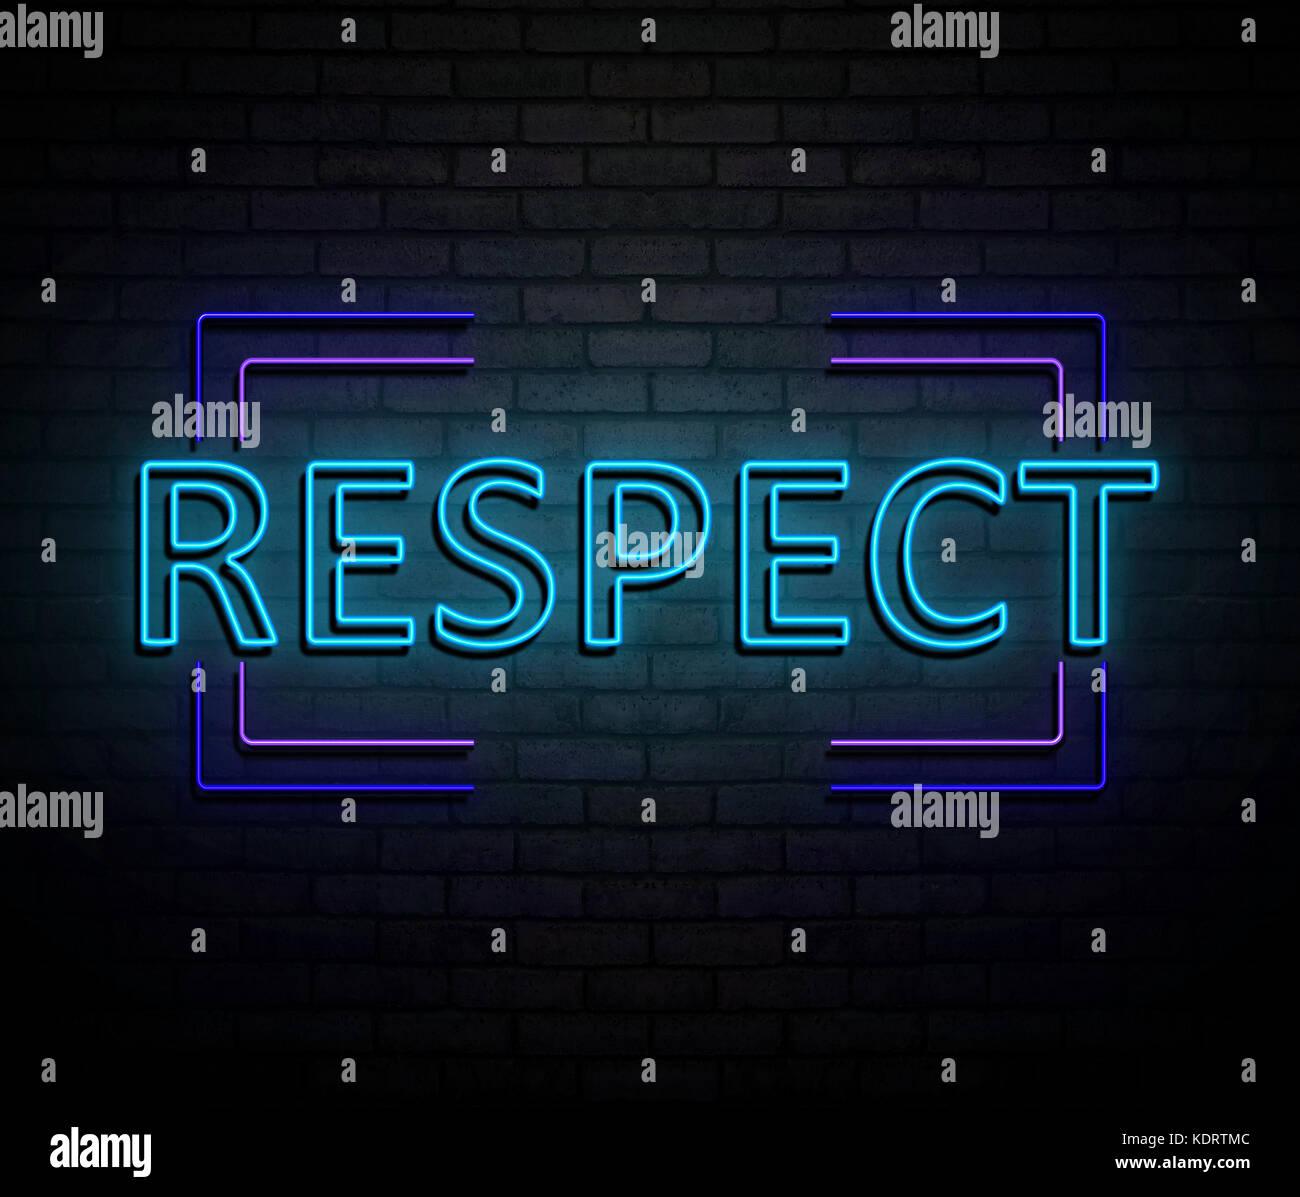 3d Illustration depicting an illuminated neon sign with a respect concept. Stock Photo